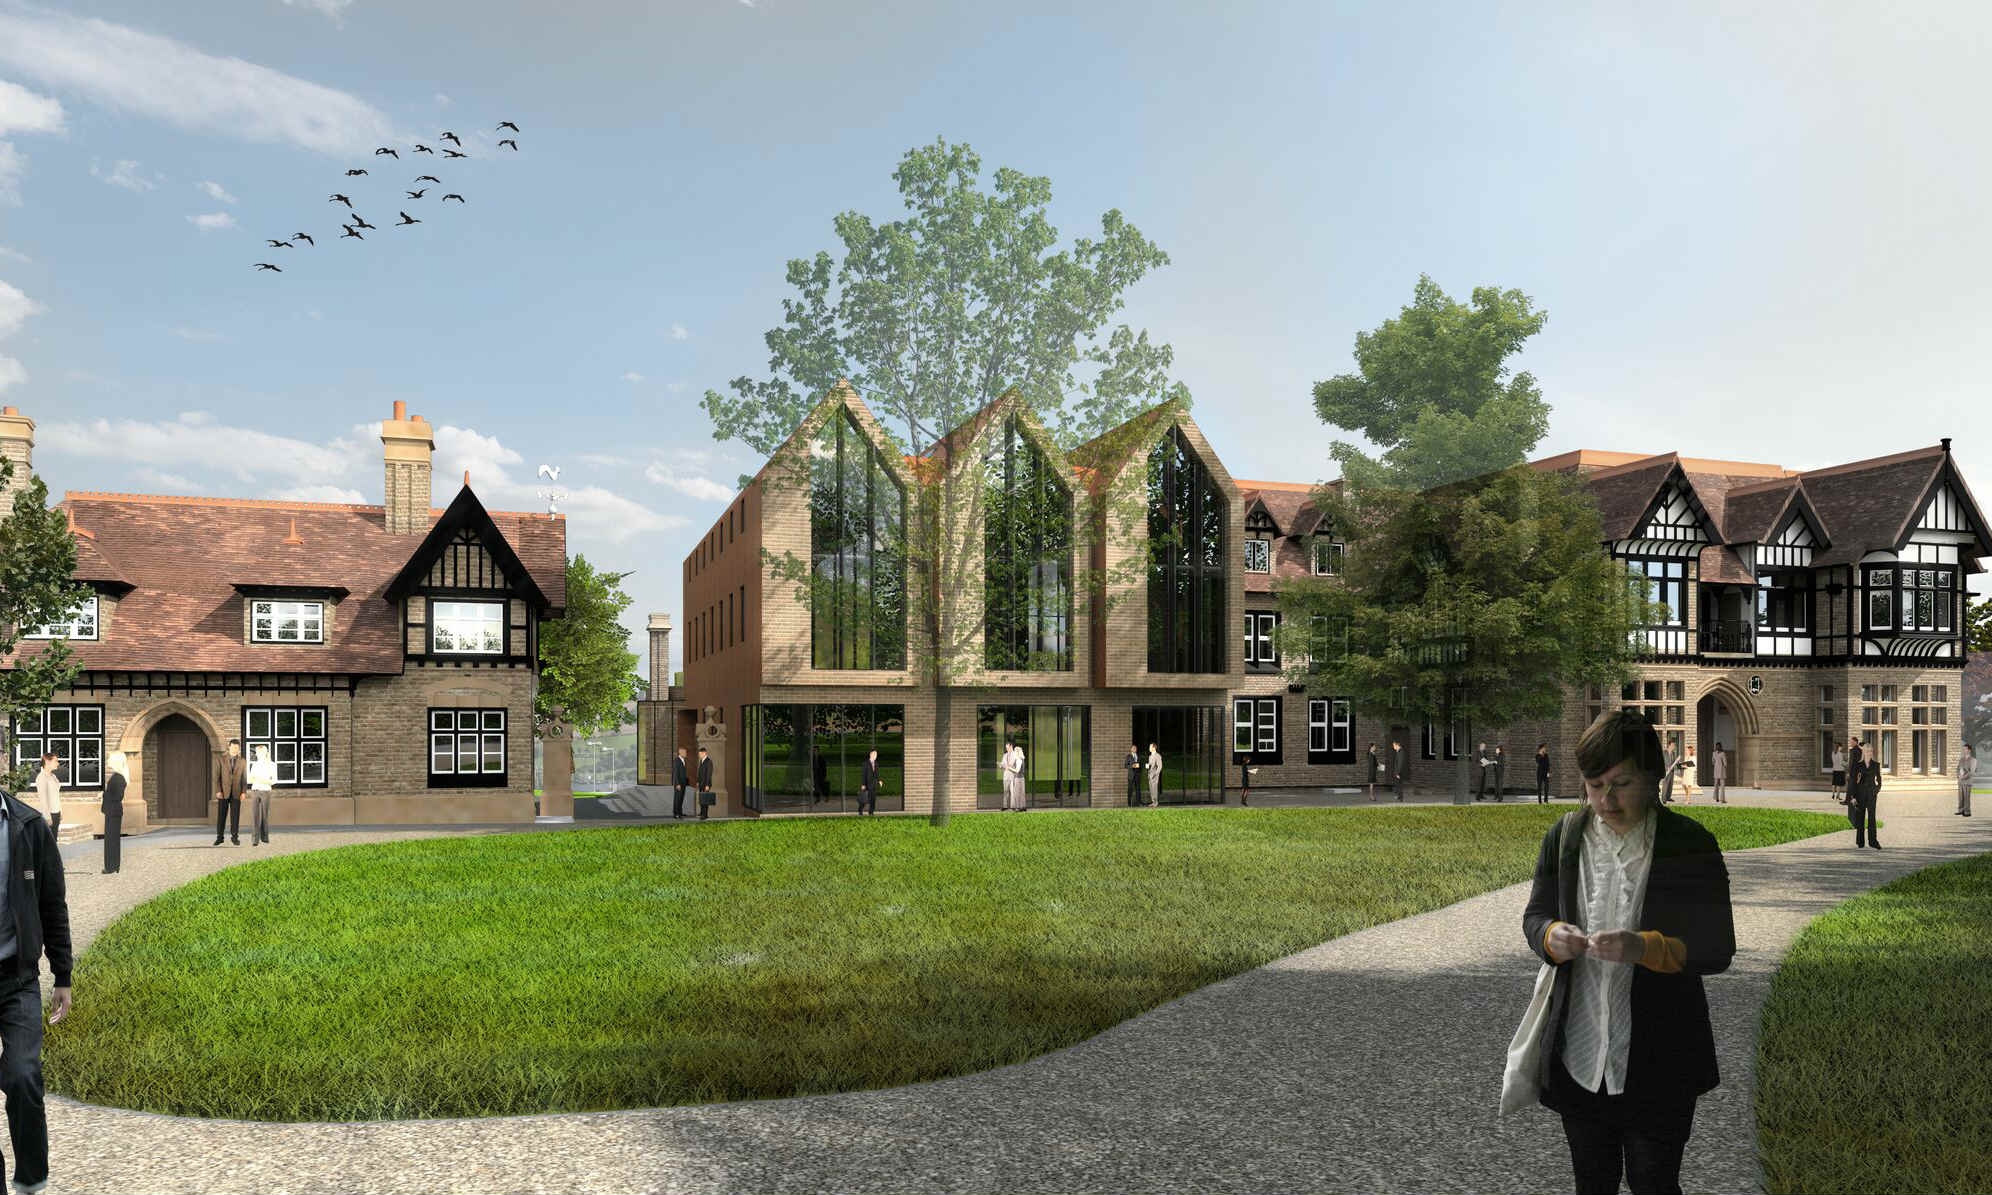 Groundbreaking ceremony gets the £15.8 million renovation of historic Brookfield House formally underway